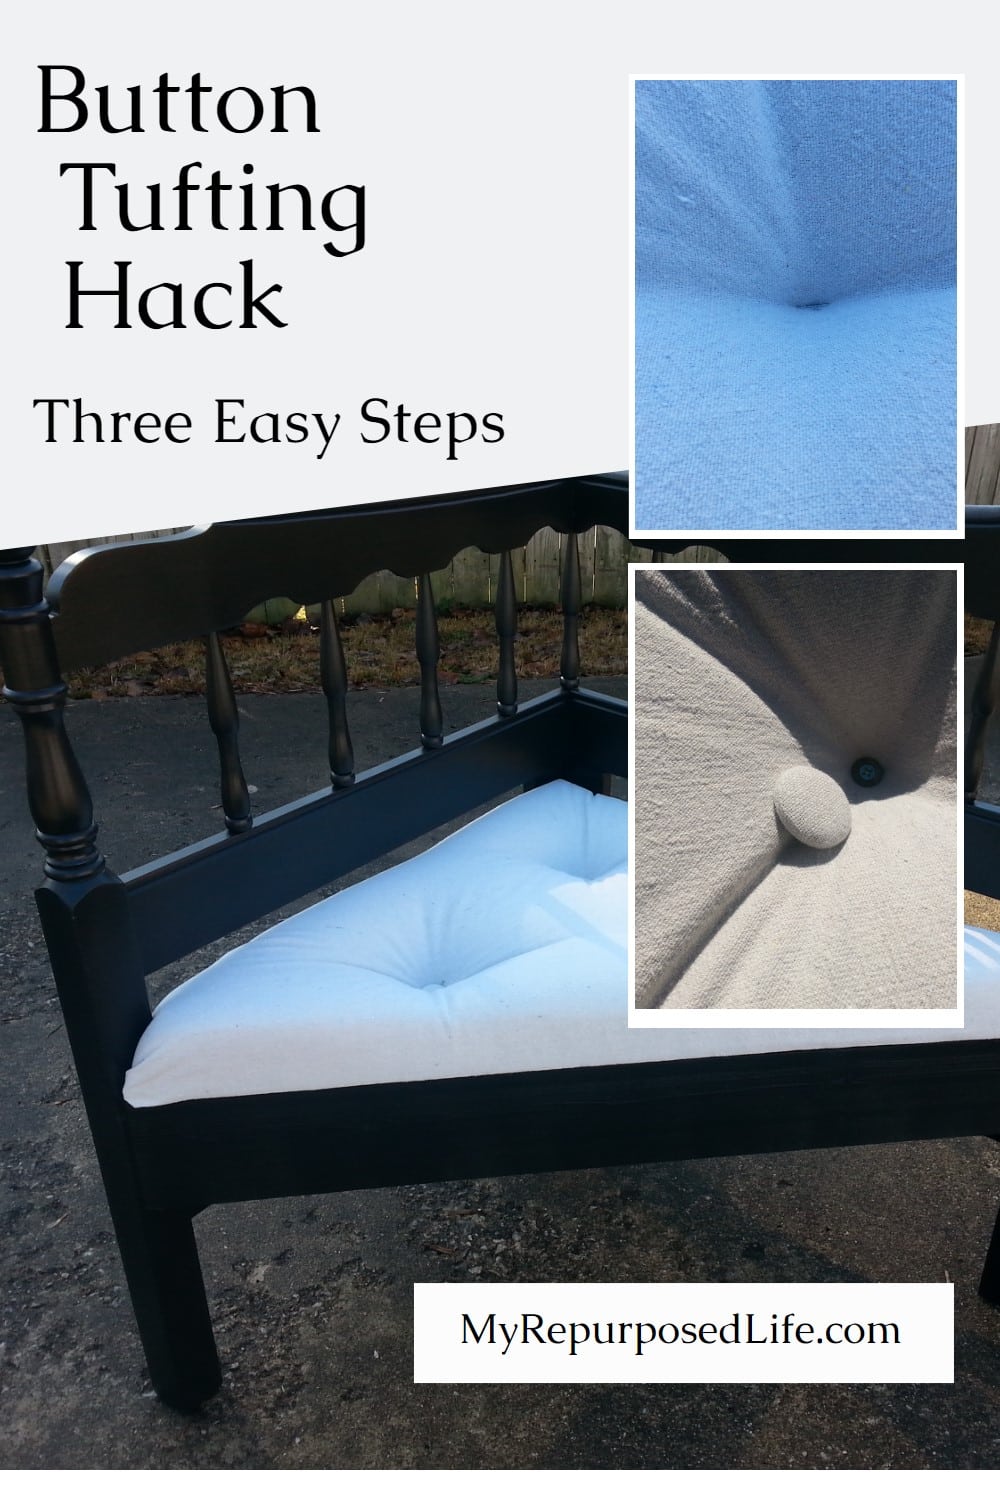 Button tufting 101 in three easy steps shows you that you don't have to drill holes in your tufted seat-but use a staple gun and screws instead. #MyRepurposedLife #repurposed #furniture #button #tufting #easy #diy via @repurposedlife